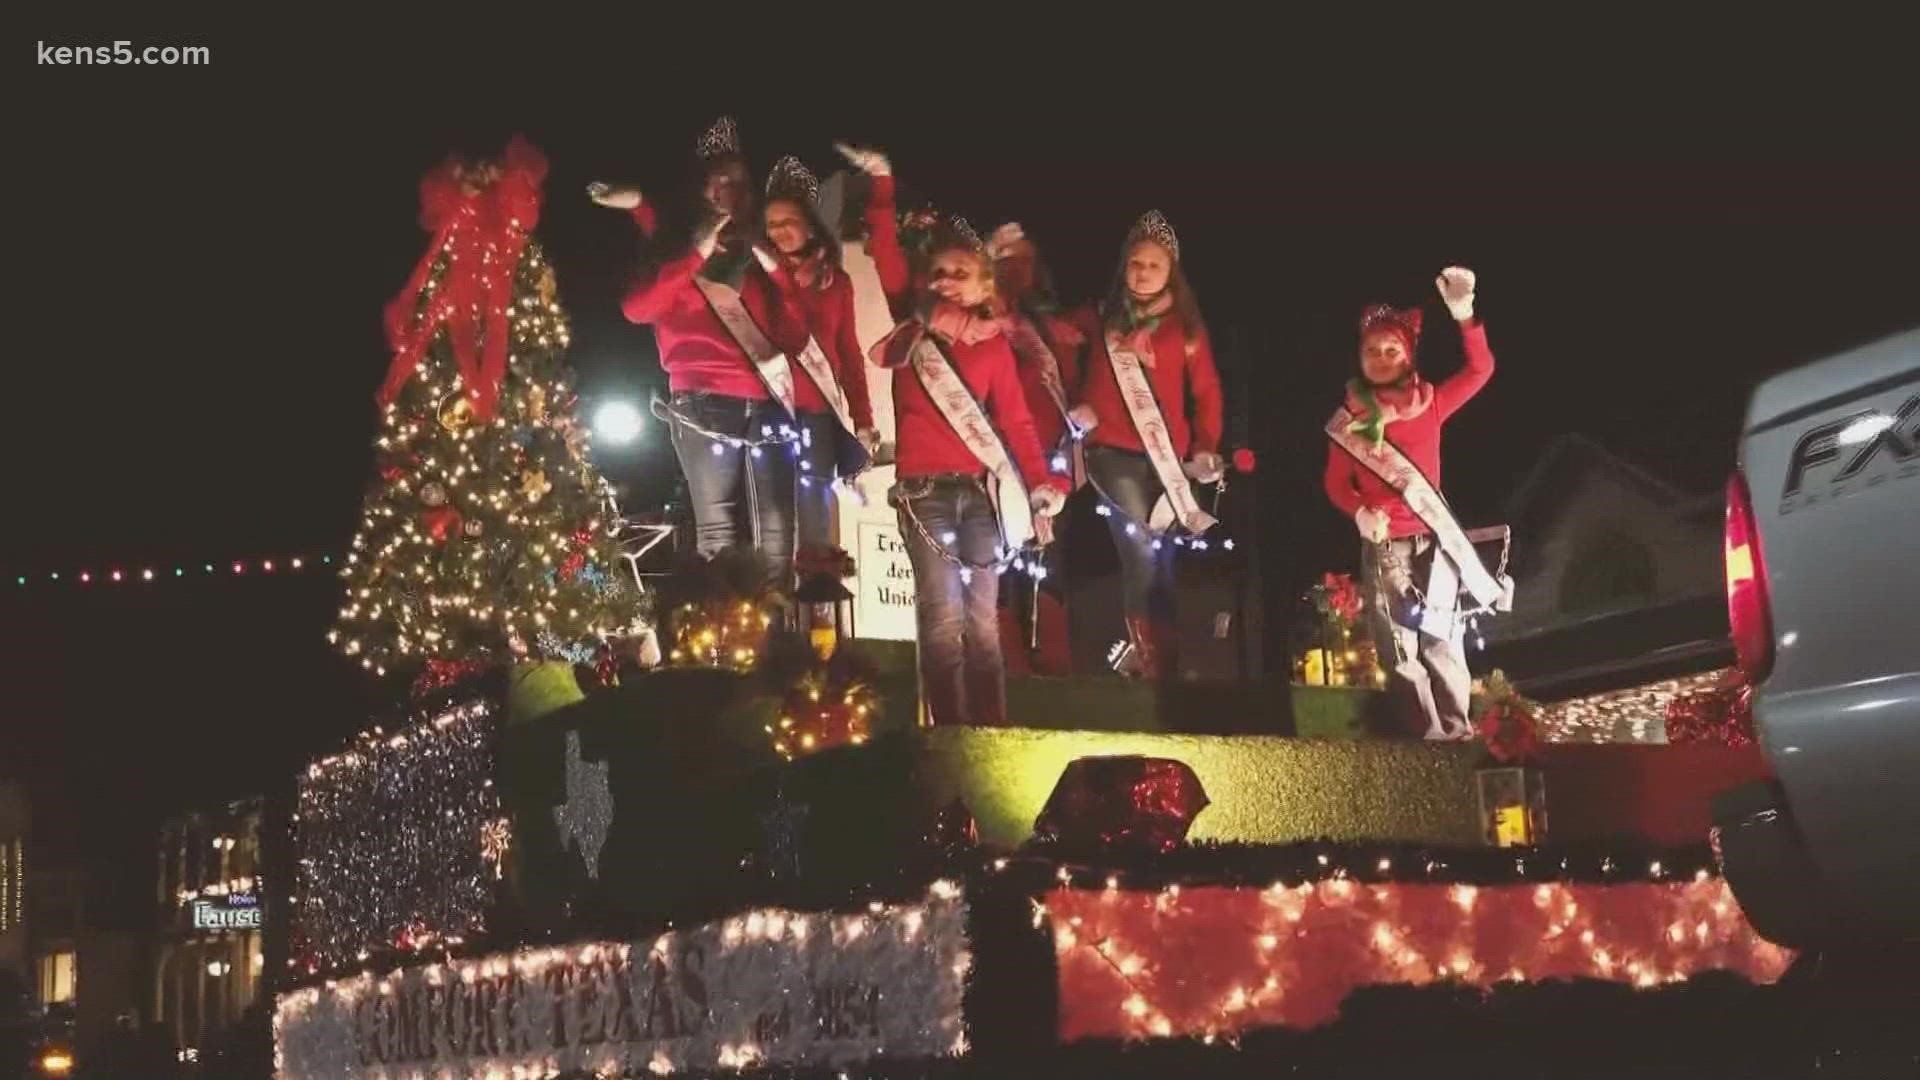 Volunteer organizers call the annual Christmas tradition, a little piece of "Americana."